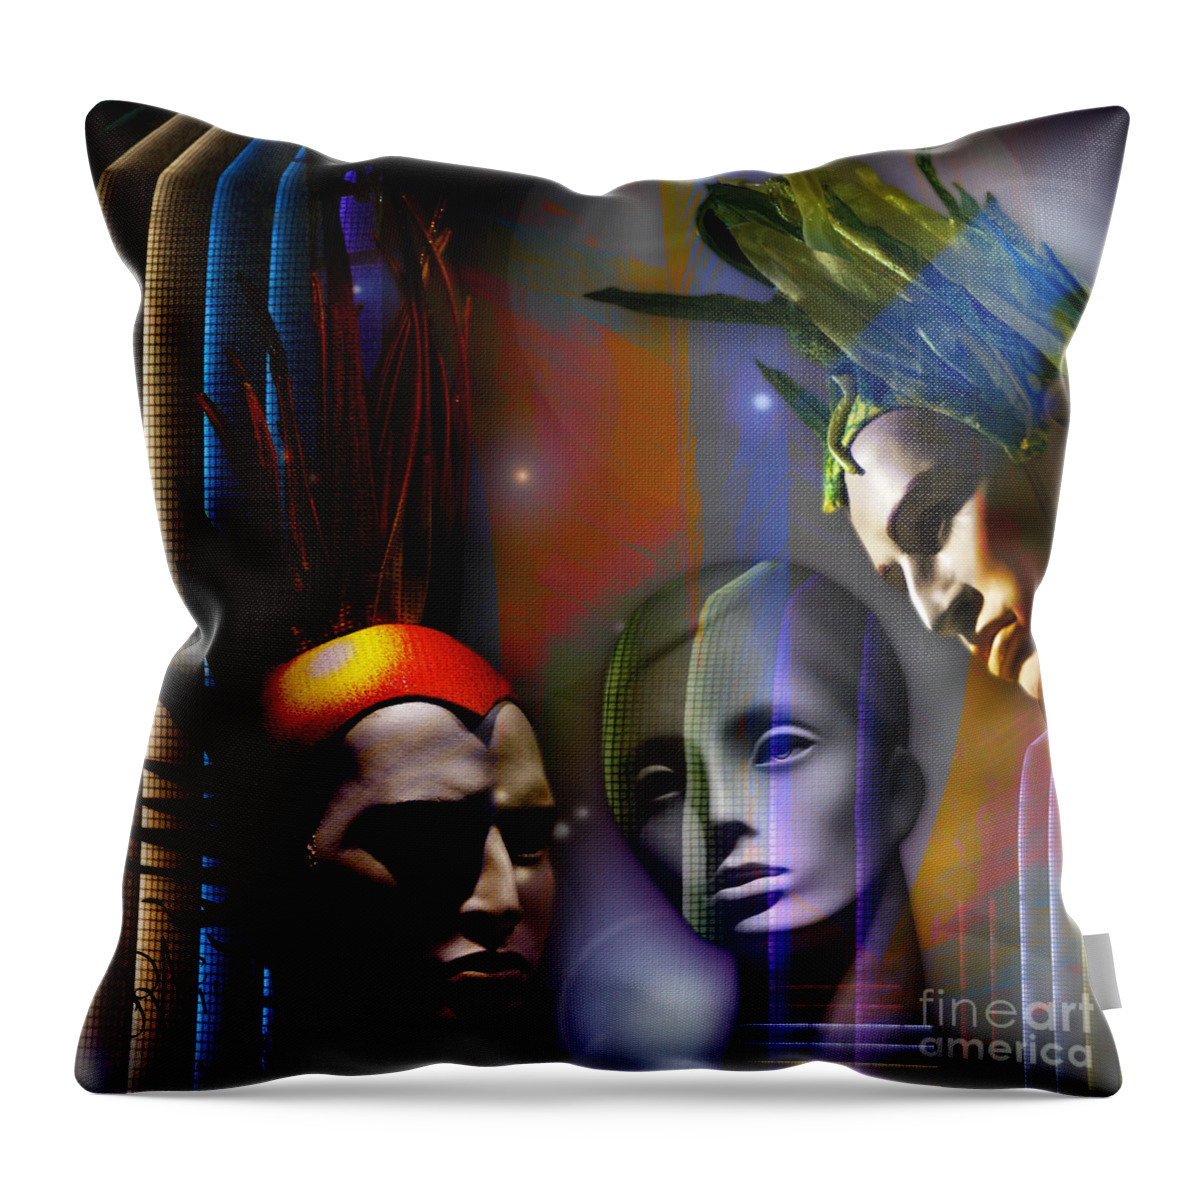 Cosmic Throw Pillow featuring the digital art Cosmic Mannequins Triad by Rosa Cobos